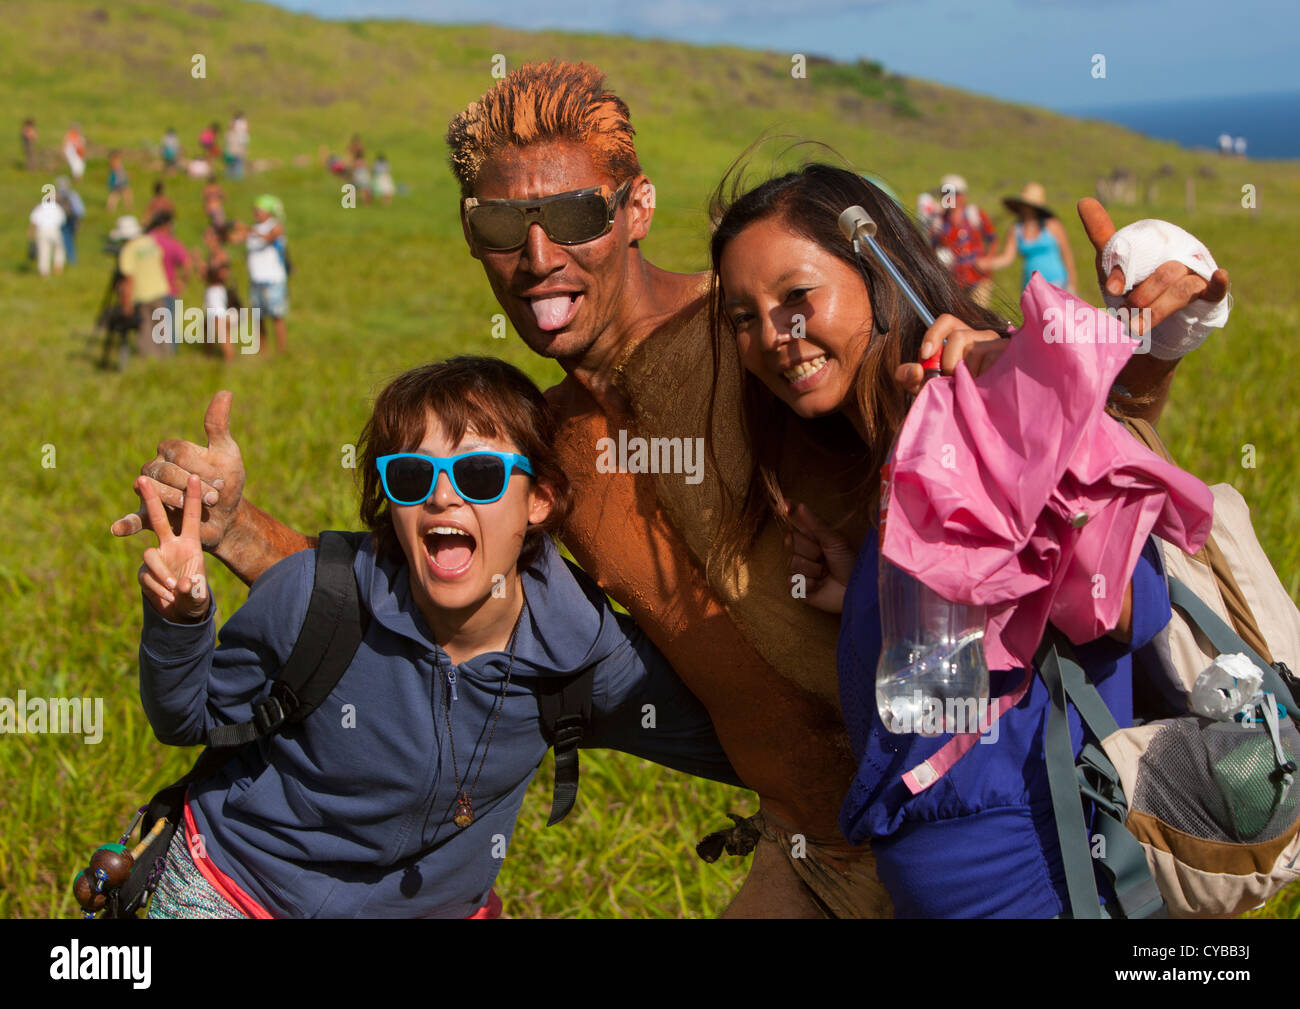 Japanese Tourists Pausing With A Rapanui Man After His Banana Haka Pei Competition, Easter Island, Chile Stock Photo